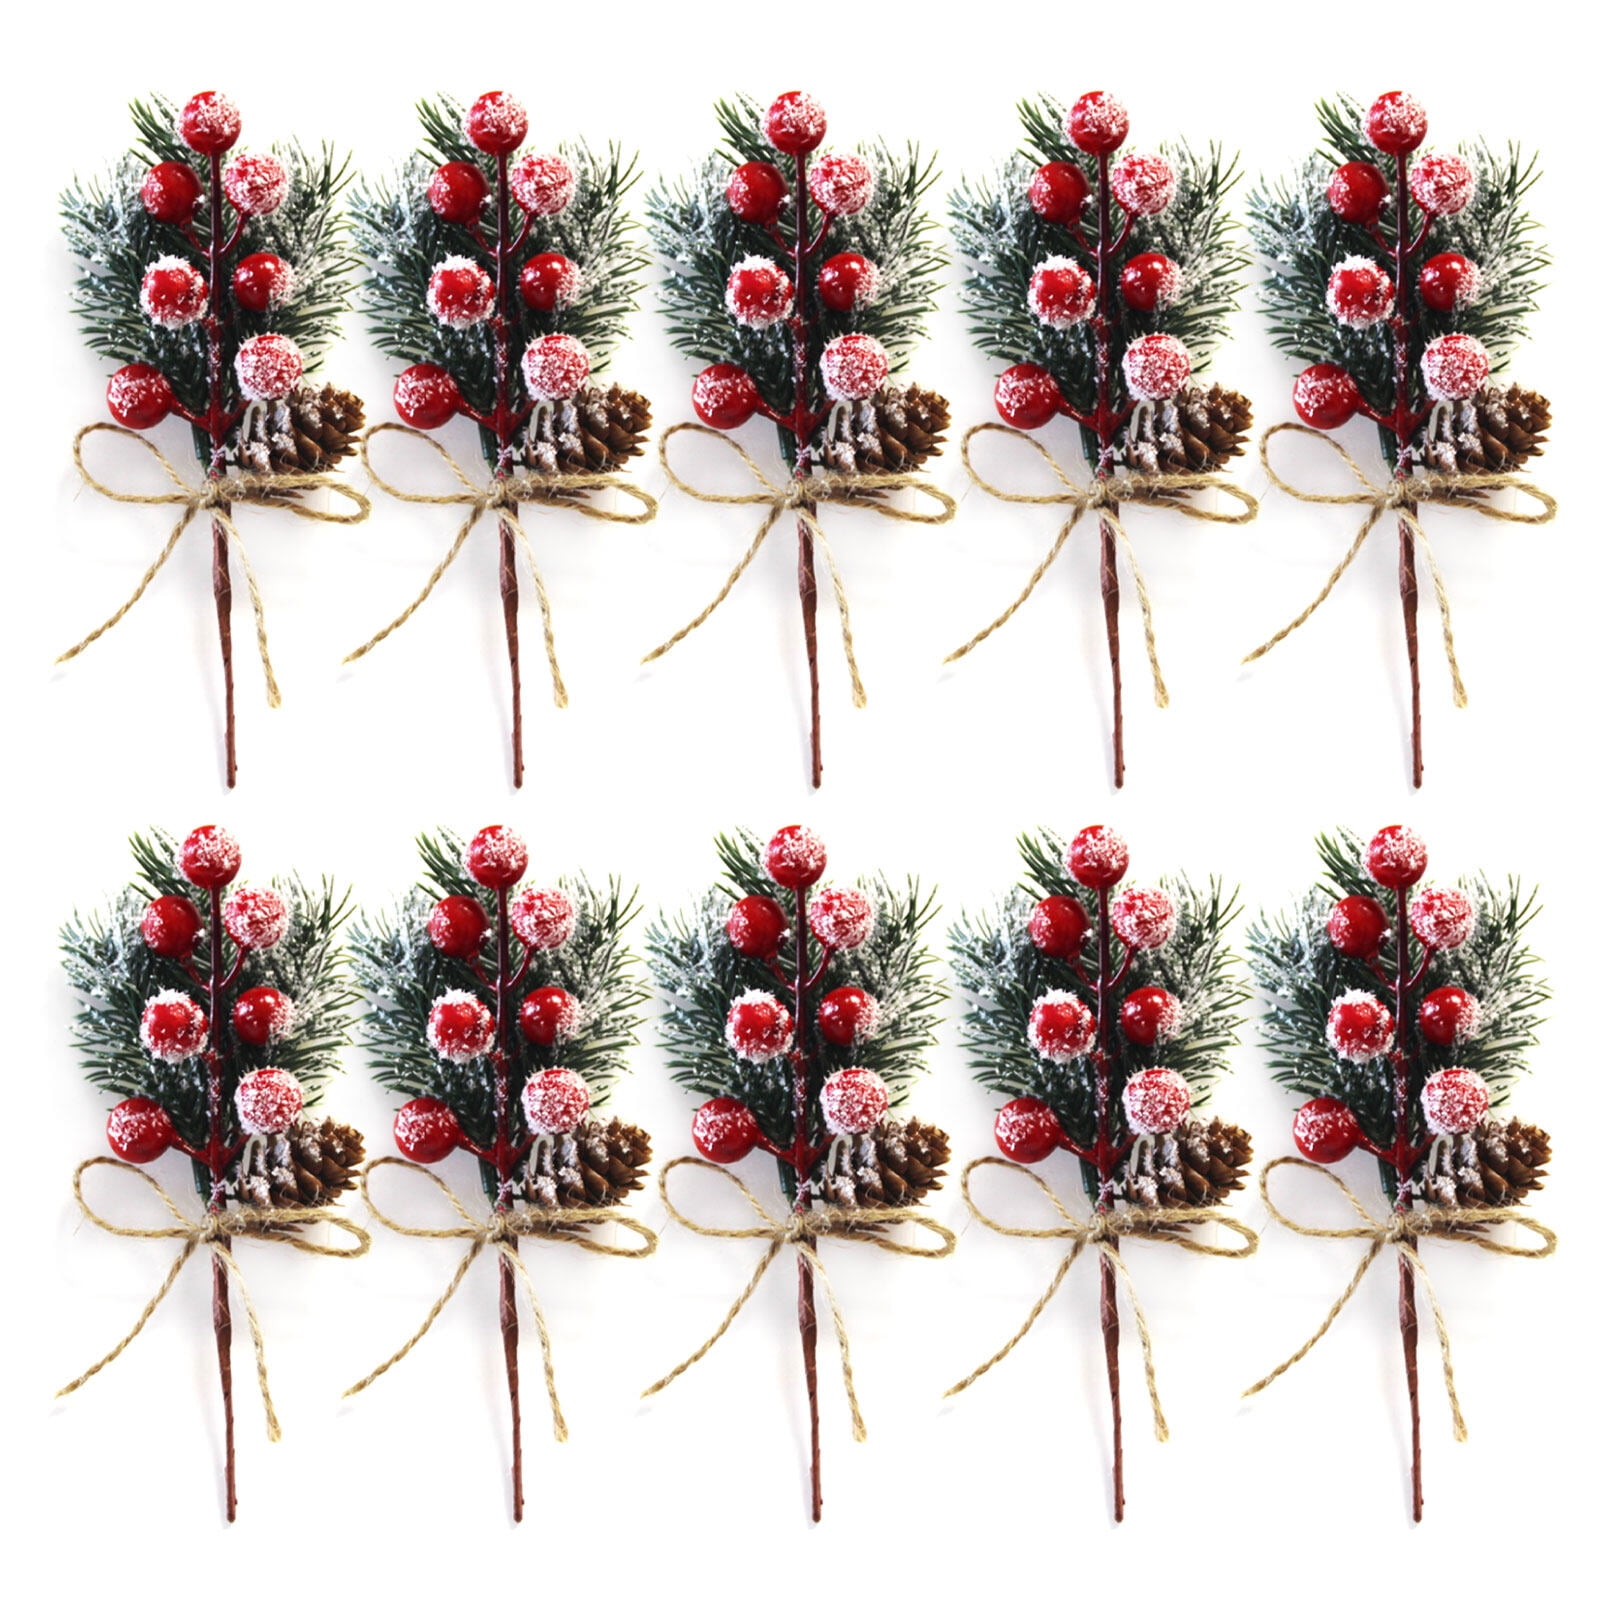 Lulu Home 16 Pieces Christmas Picks, Artificial Pine Branches with